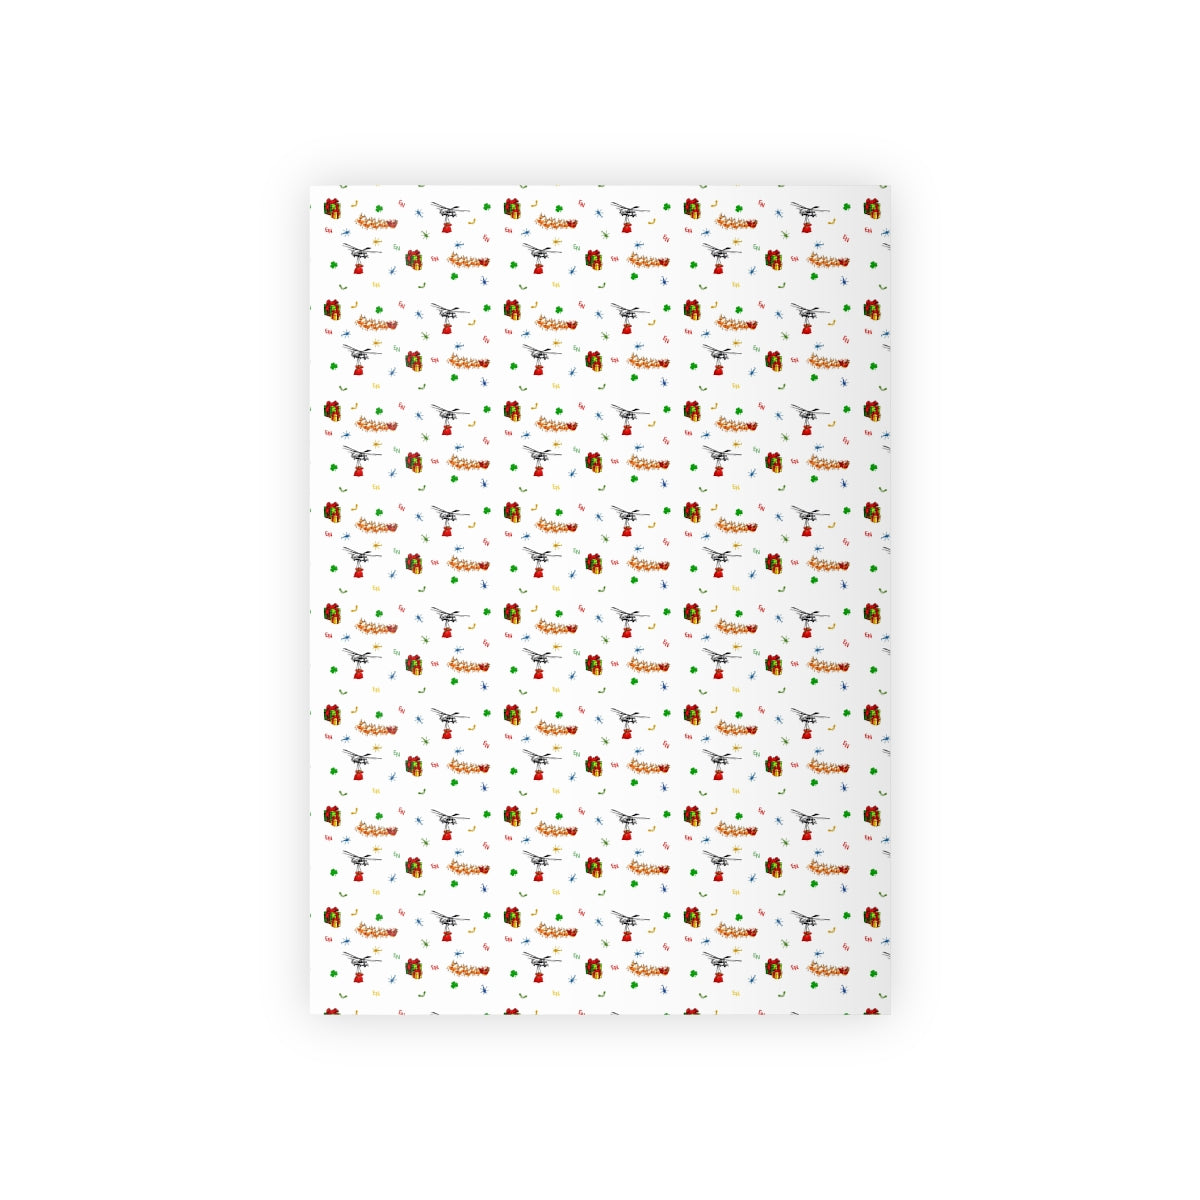 Bulk Barkday Wrapping Paper Roll - 520 Sq Ft